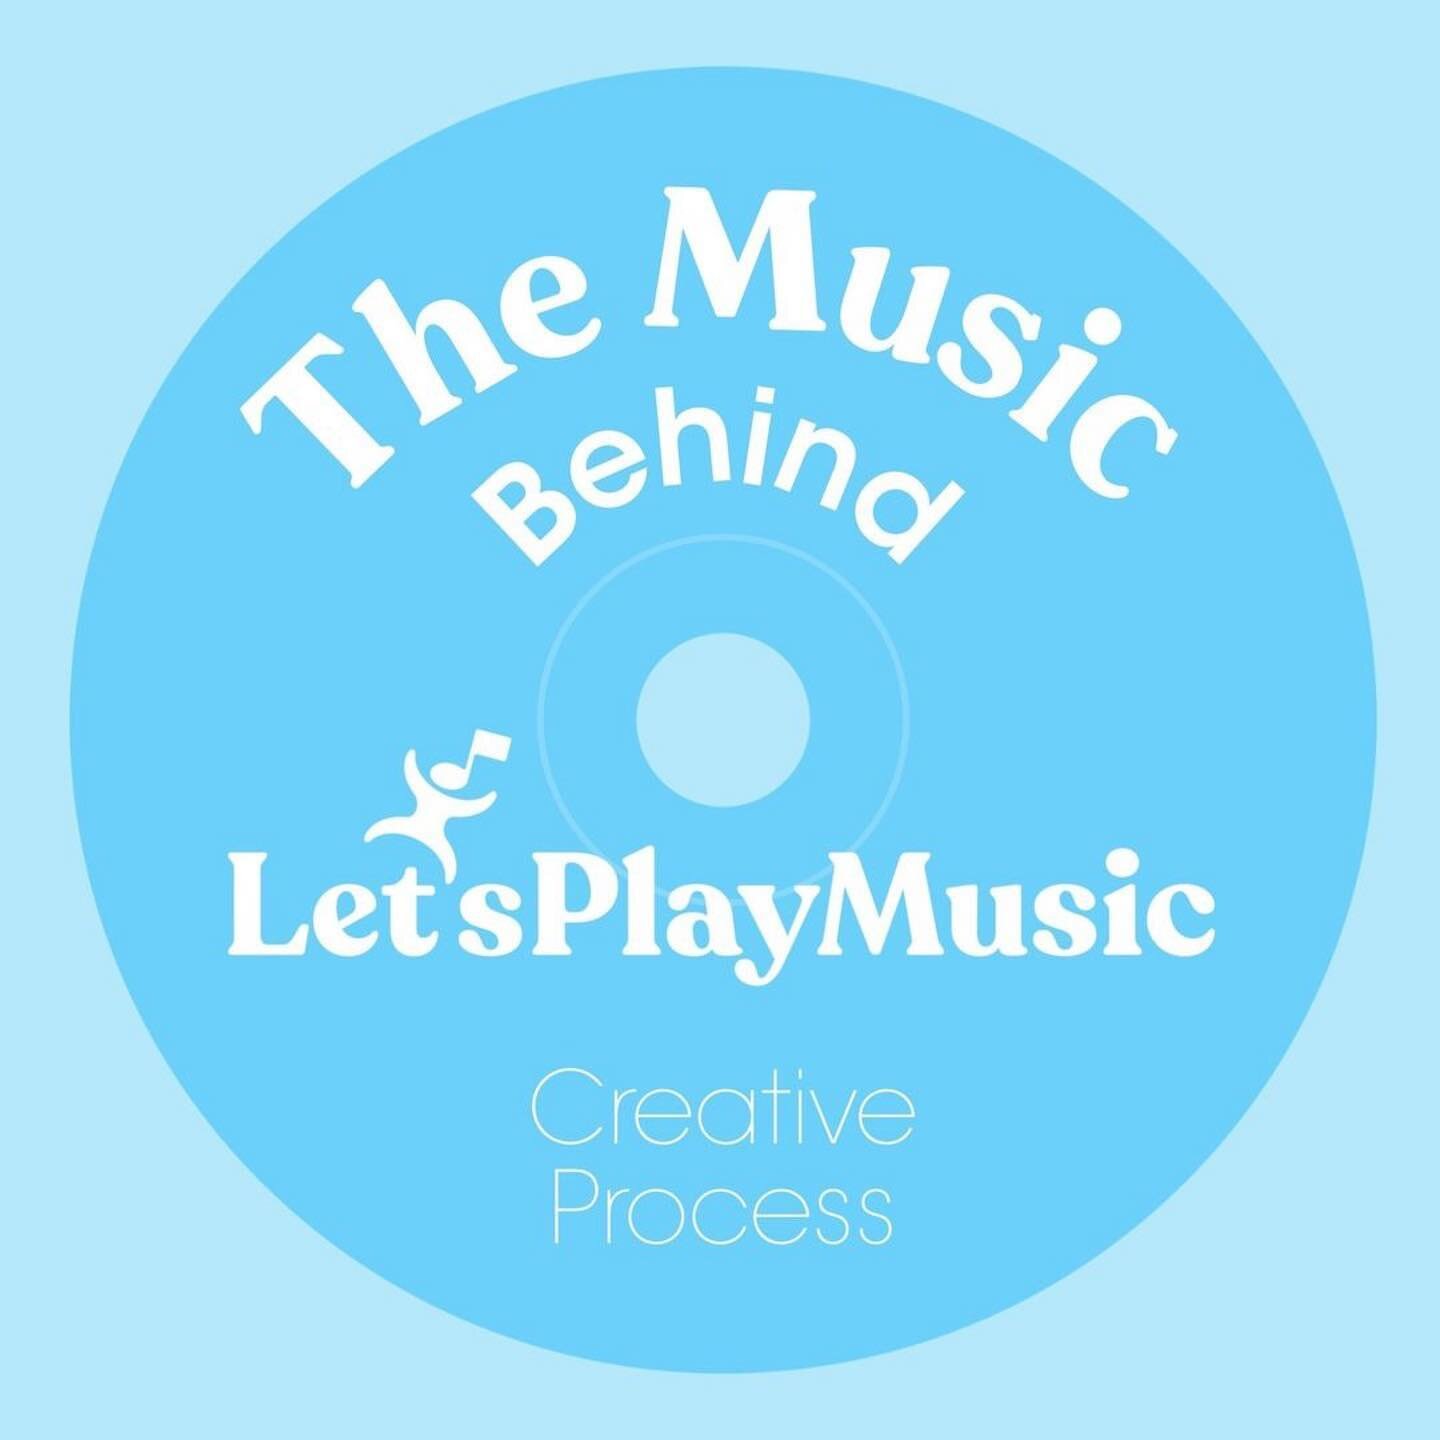 #Repost @lets.play.music.official 
Did you know that all of Let's Play Musics albums and tracks are made and recorded SPECIFICALLY by us! Yup, from start to finish, what you hear is what we have created specifically for the curriculum.

We use famili